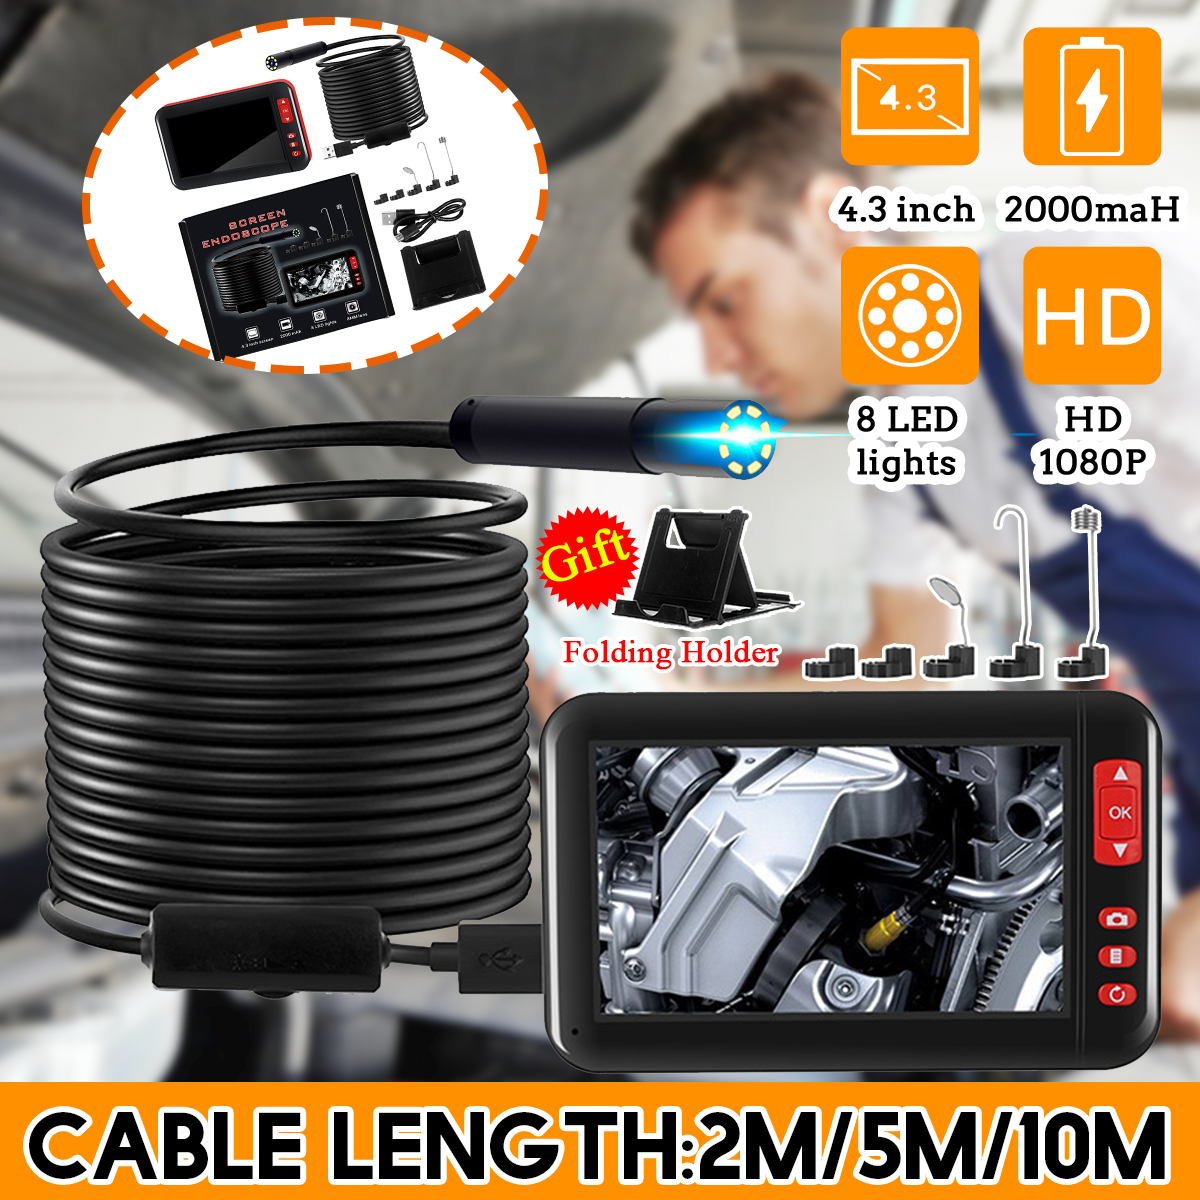 43-Inch-Mini-Endo-scope-Camera-1080P-USB-Cable-Inspection-Camcorder-for-Auto-Repair-Industrial-Flexi-1610124-1